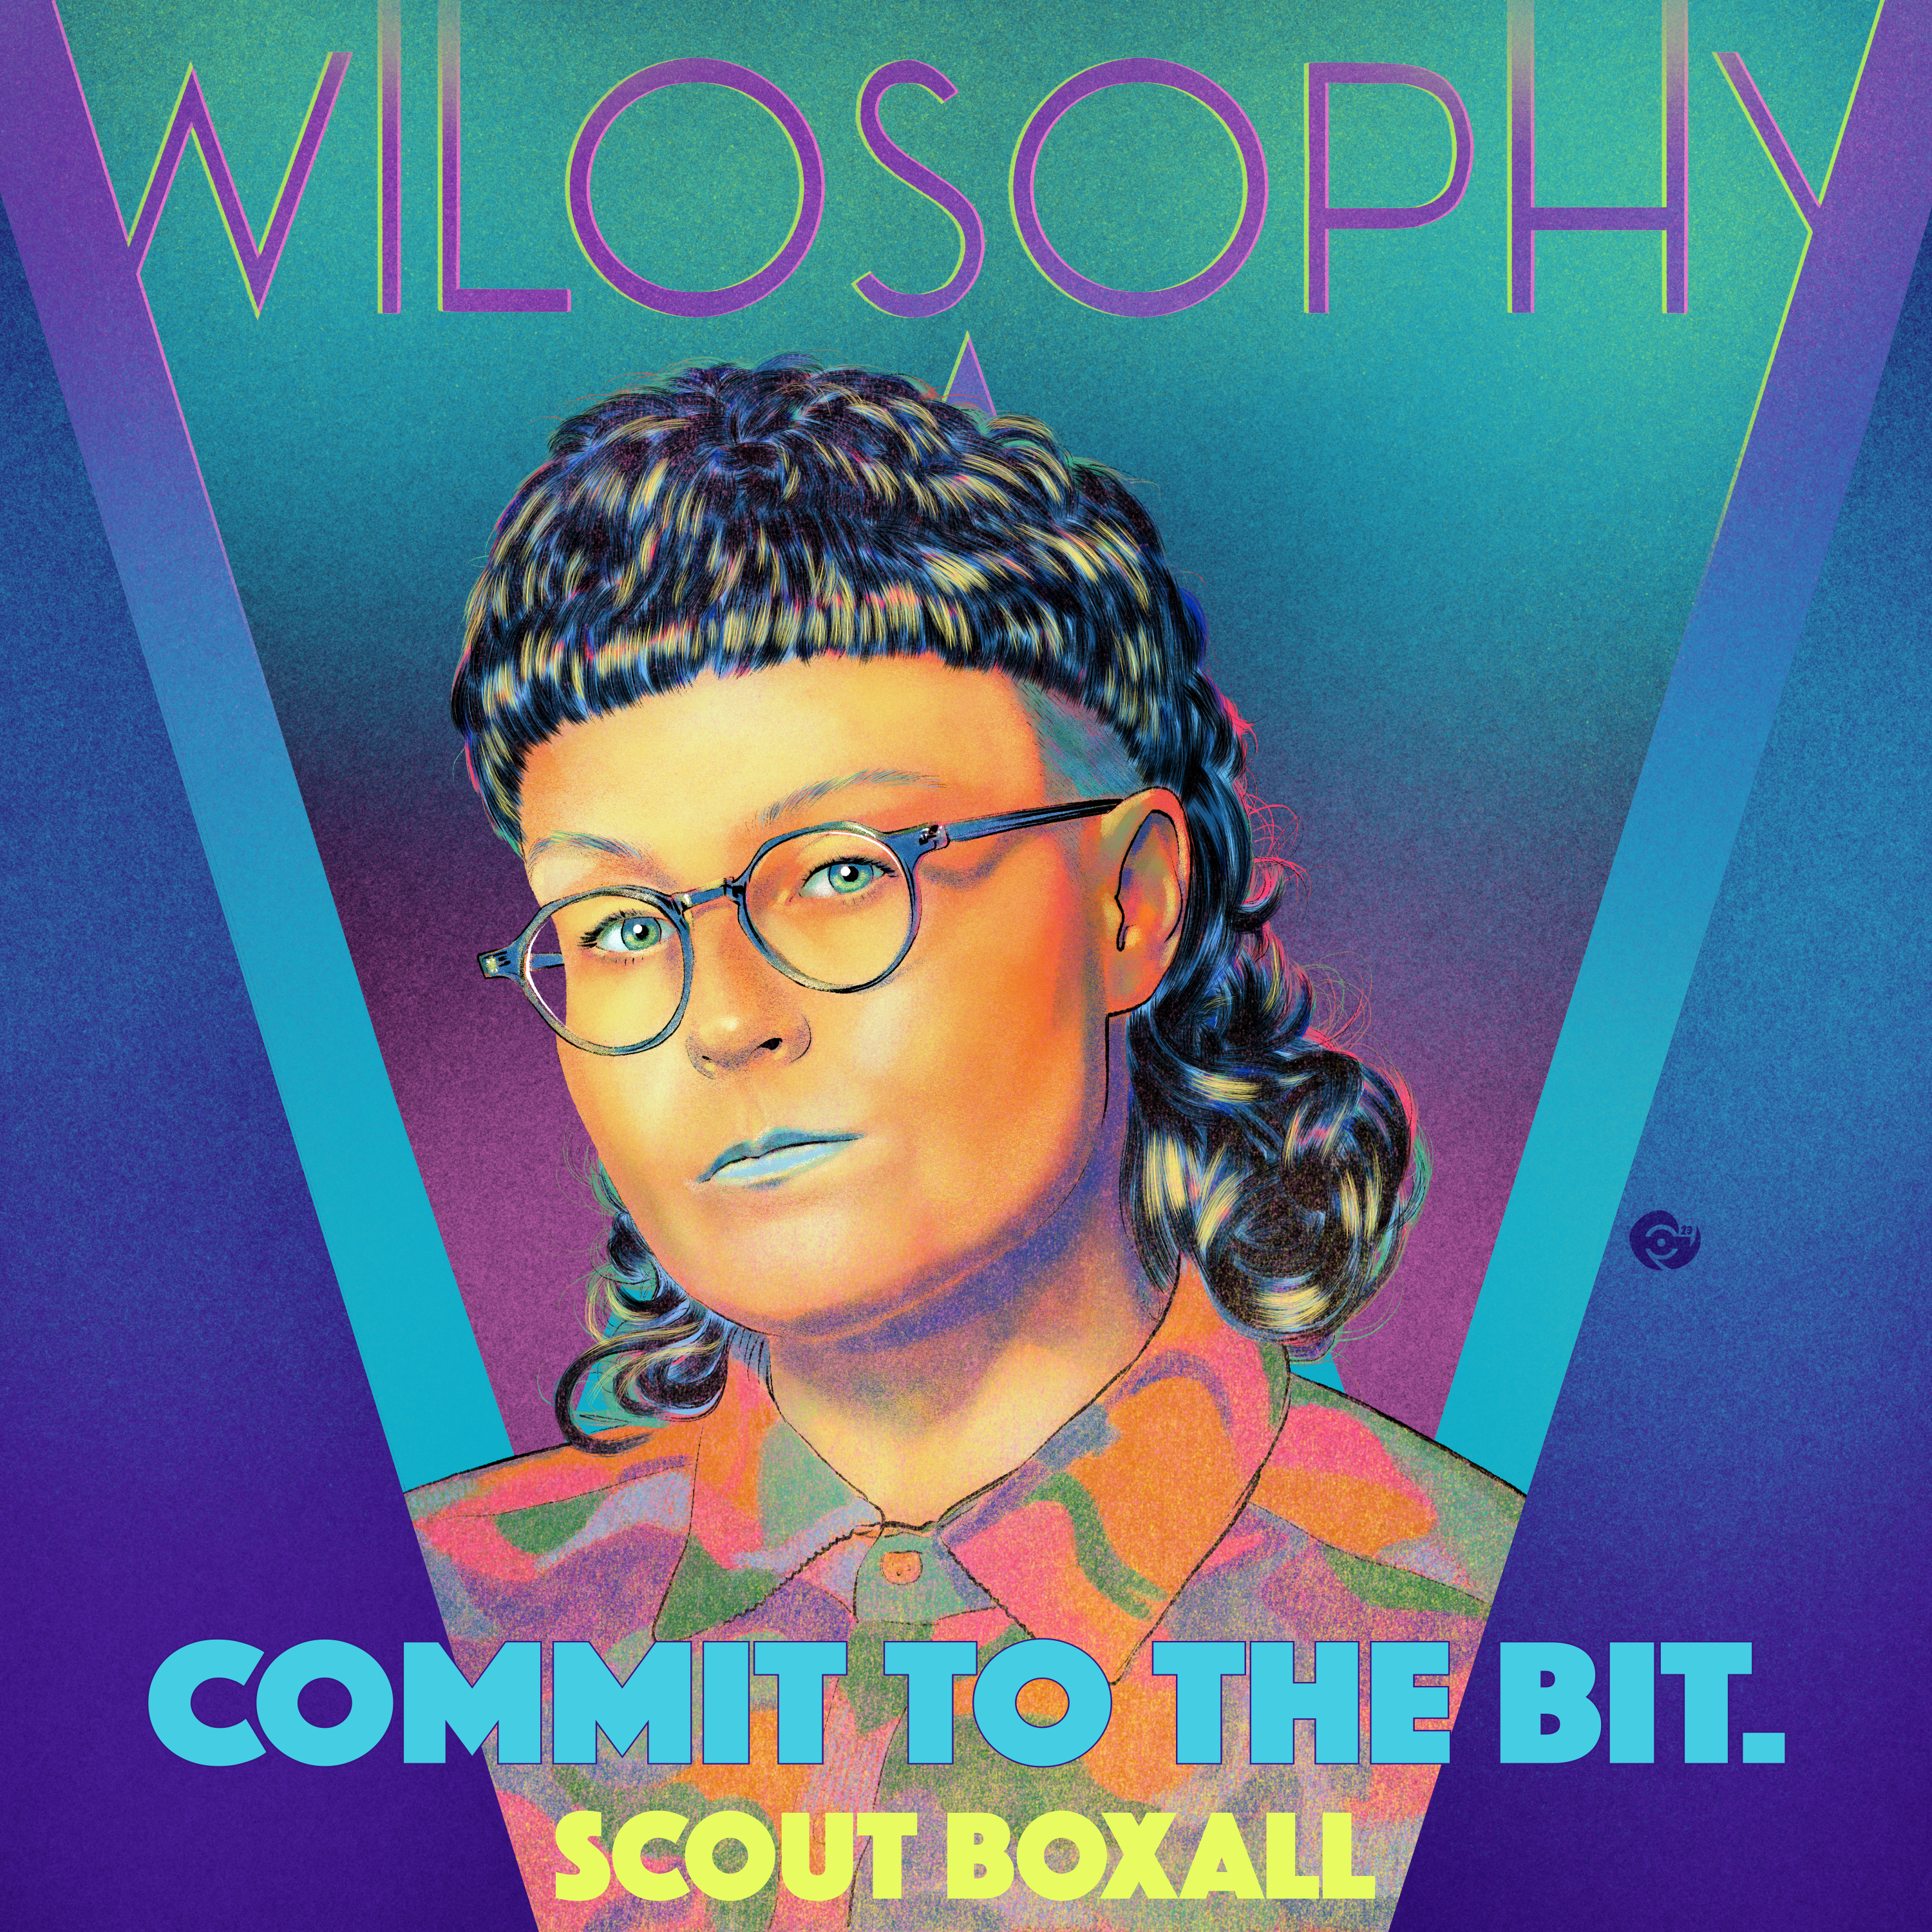 WILOSOPHY with Scout Boxall